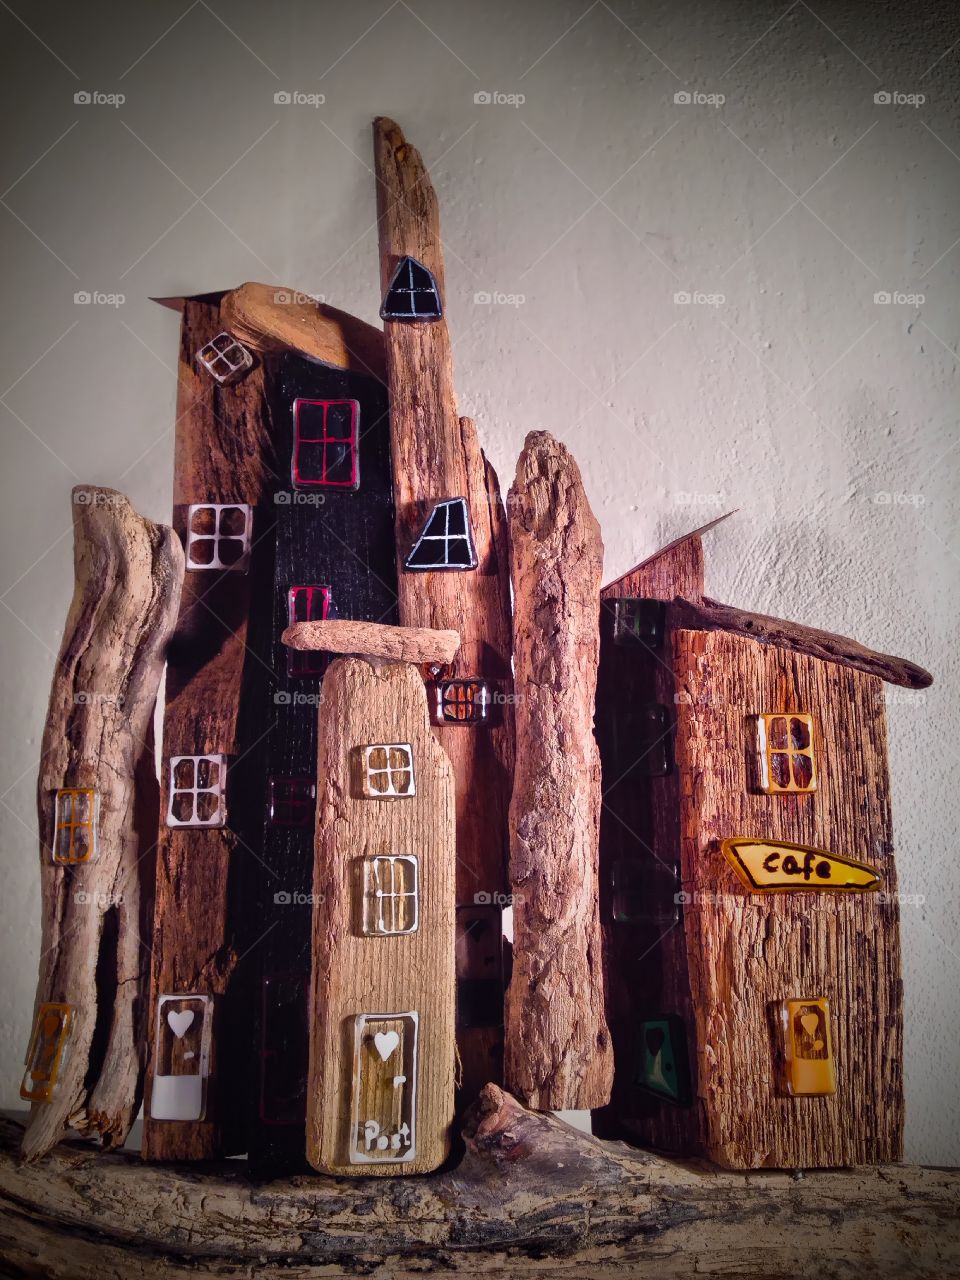 Welcome to driftwood city. Made of recycled material.